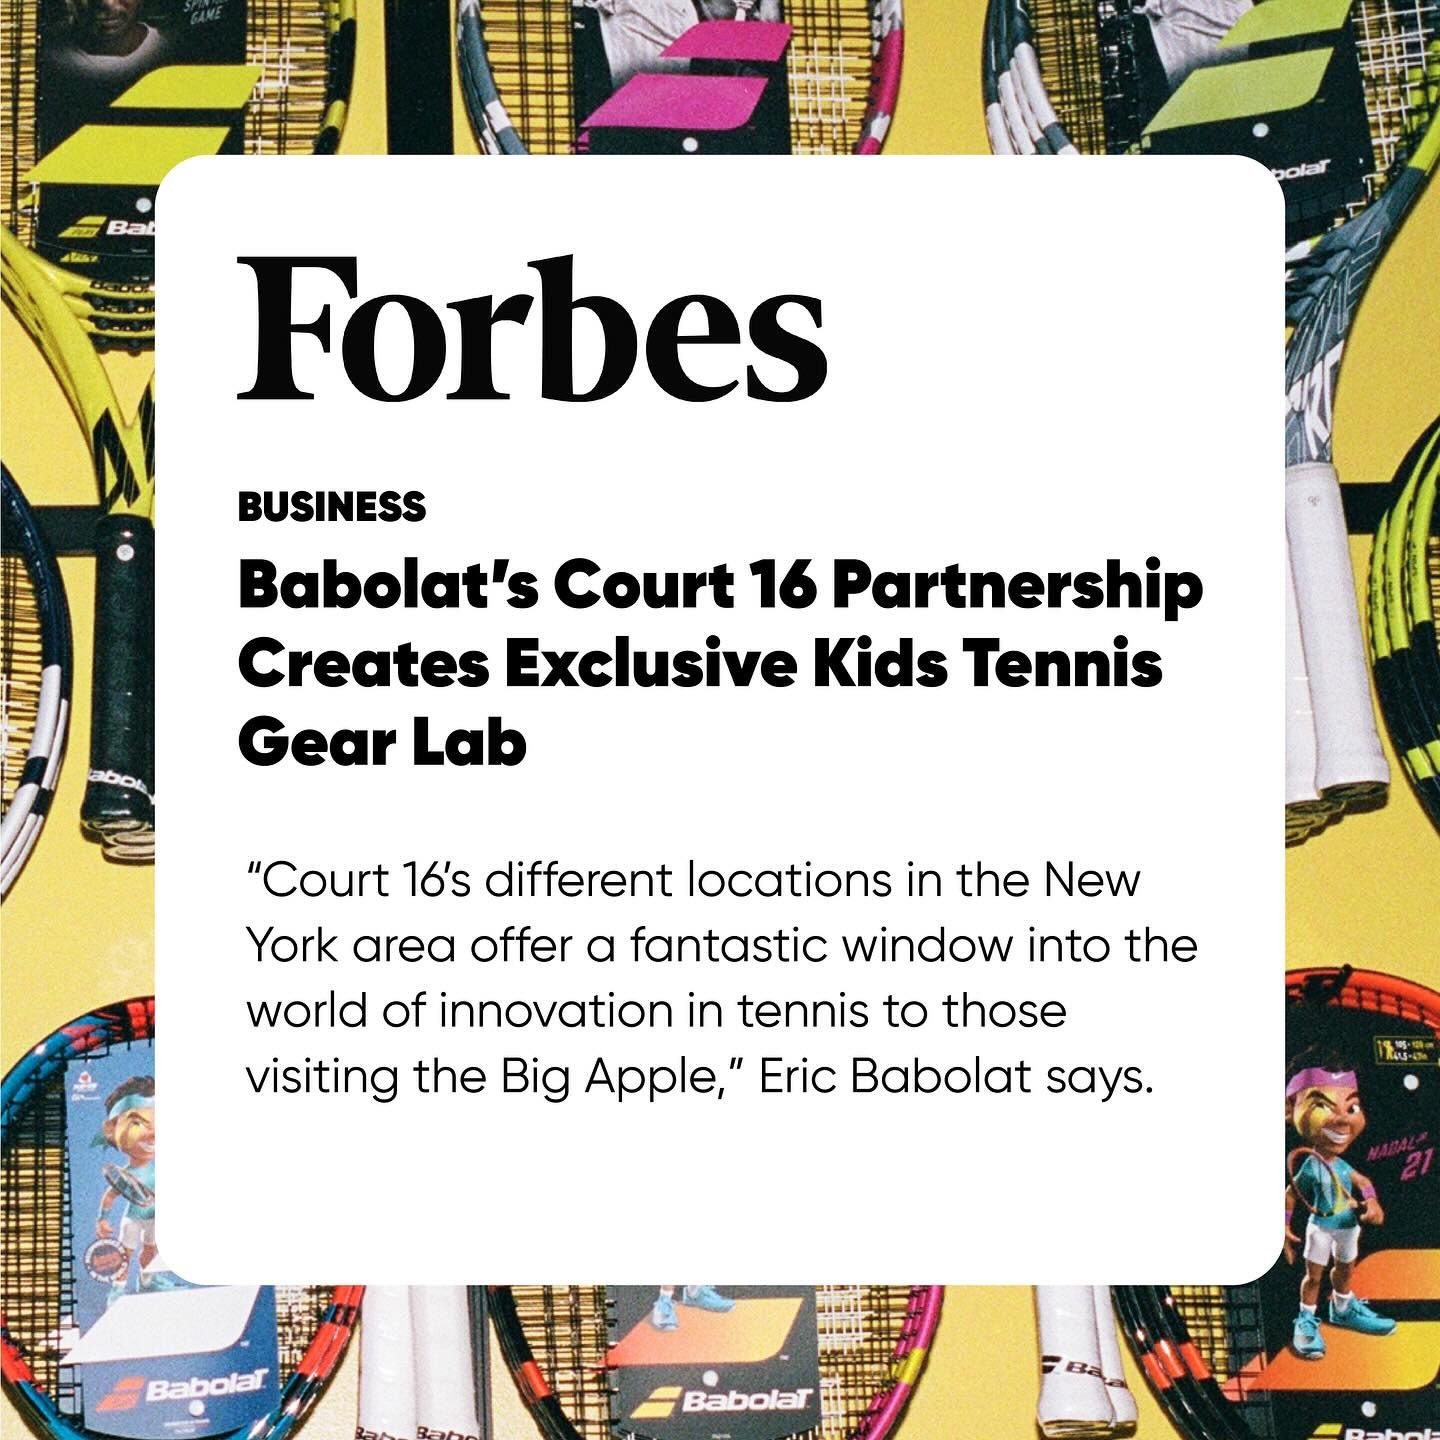 A big thank you to @forbes and tdnewcomb @feltalleytennis for spotlighting our partnership with @babolat and The Babolat Kids Lab we&rsquo;ve created together! As we look to make tennis more accessible and easier to learn, we were honored to team up 